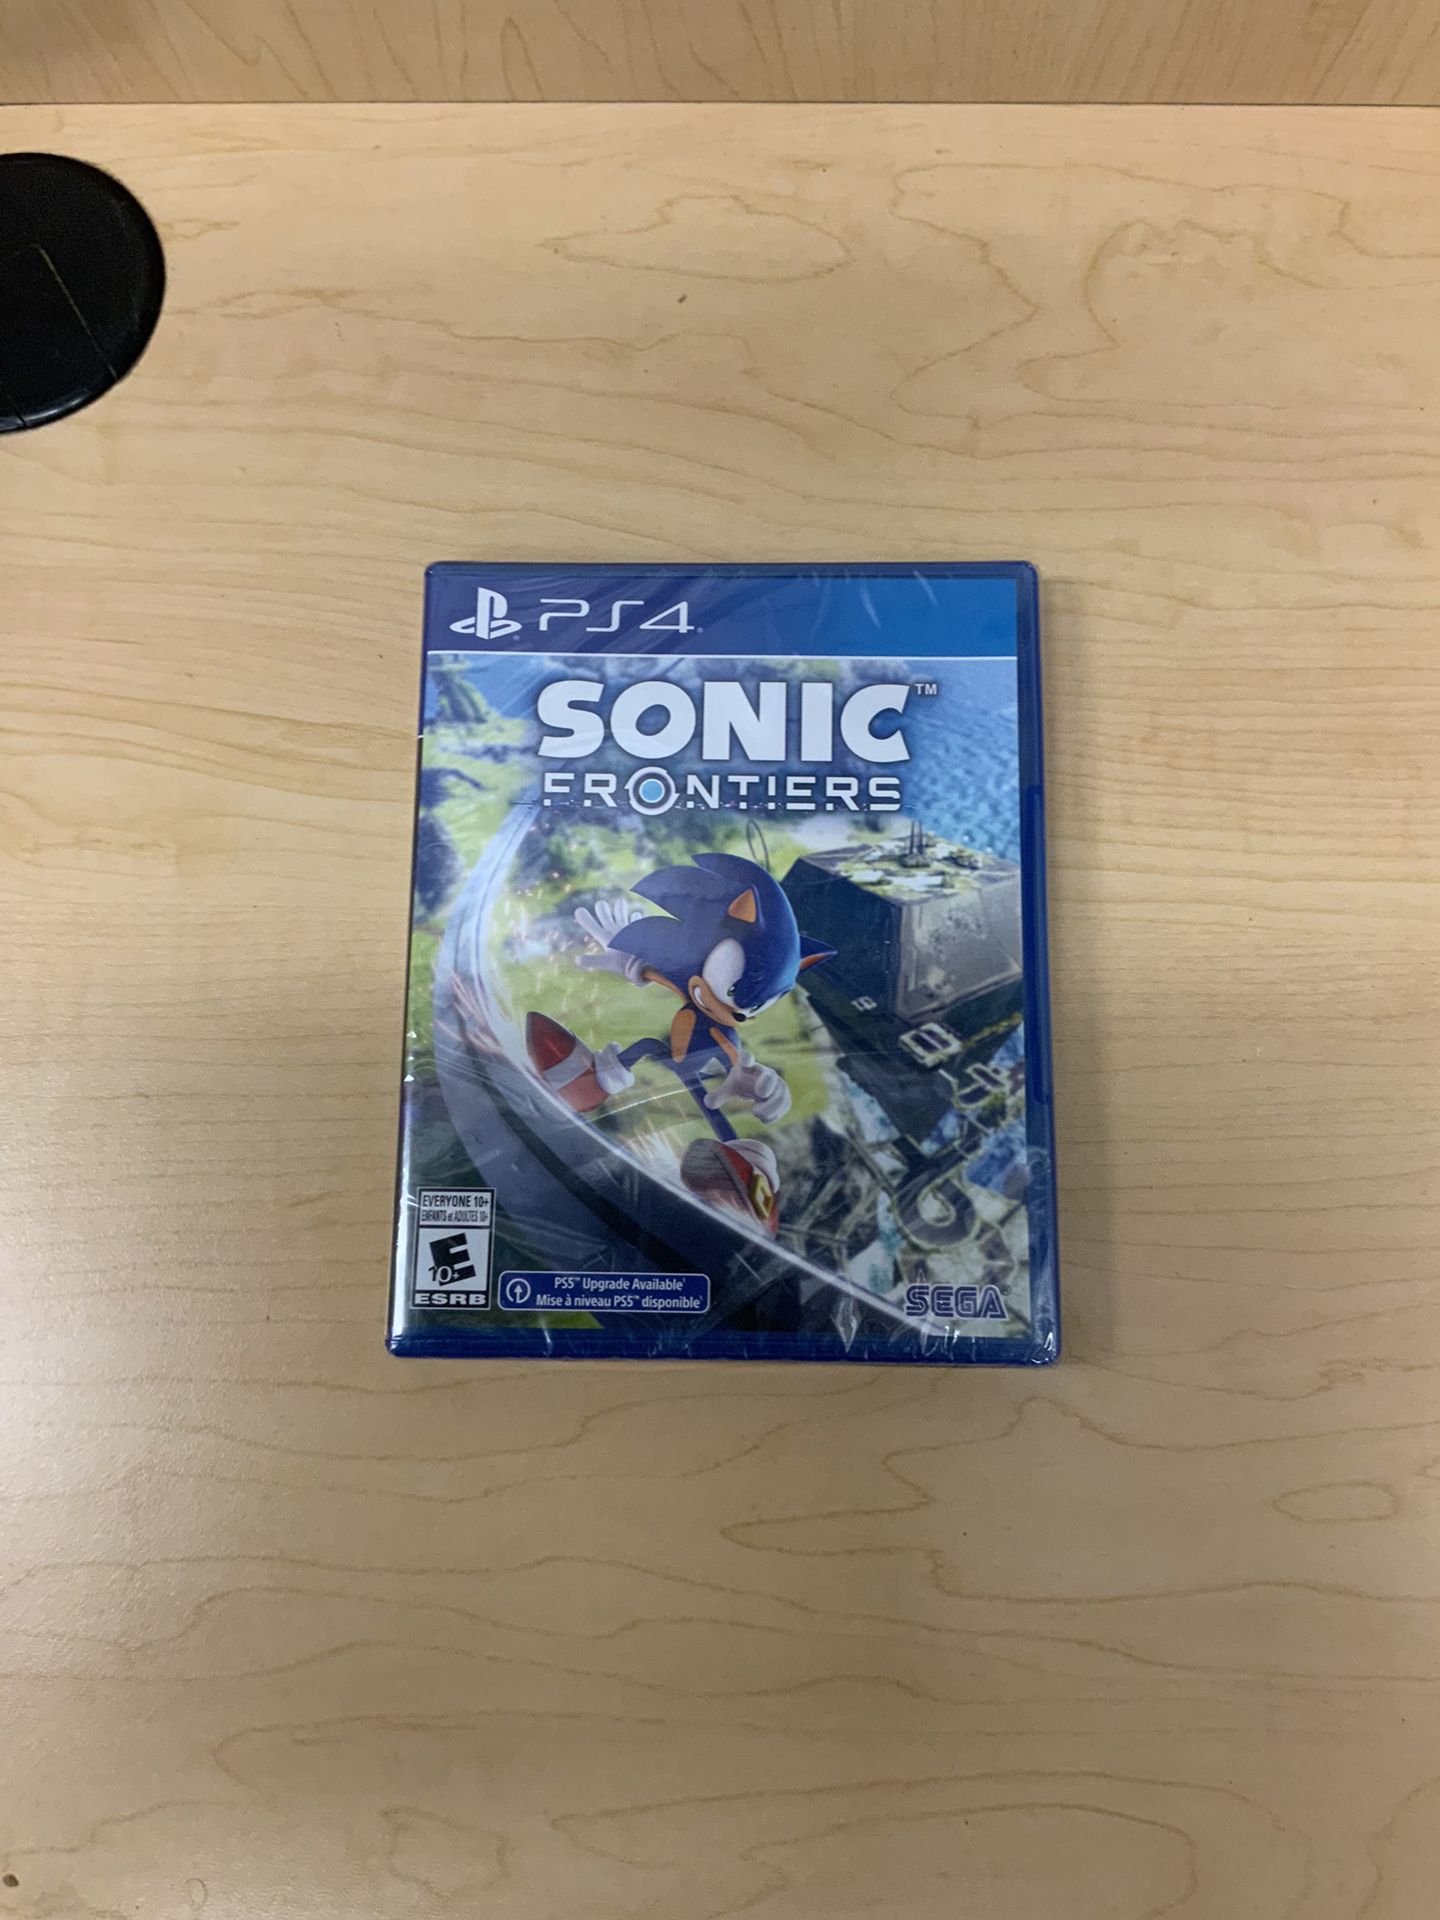 Playstation 4 Sonic Frontiers PS4 Games Blue Ray Disc Sealed 